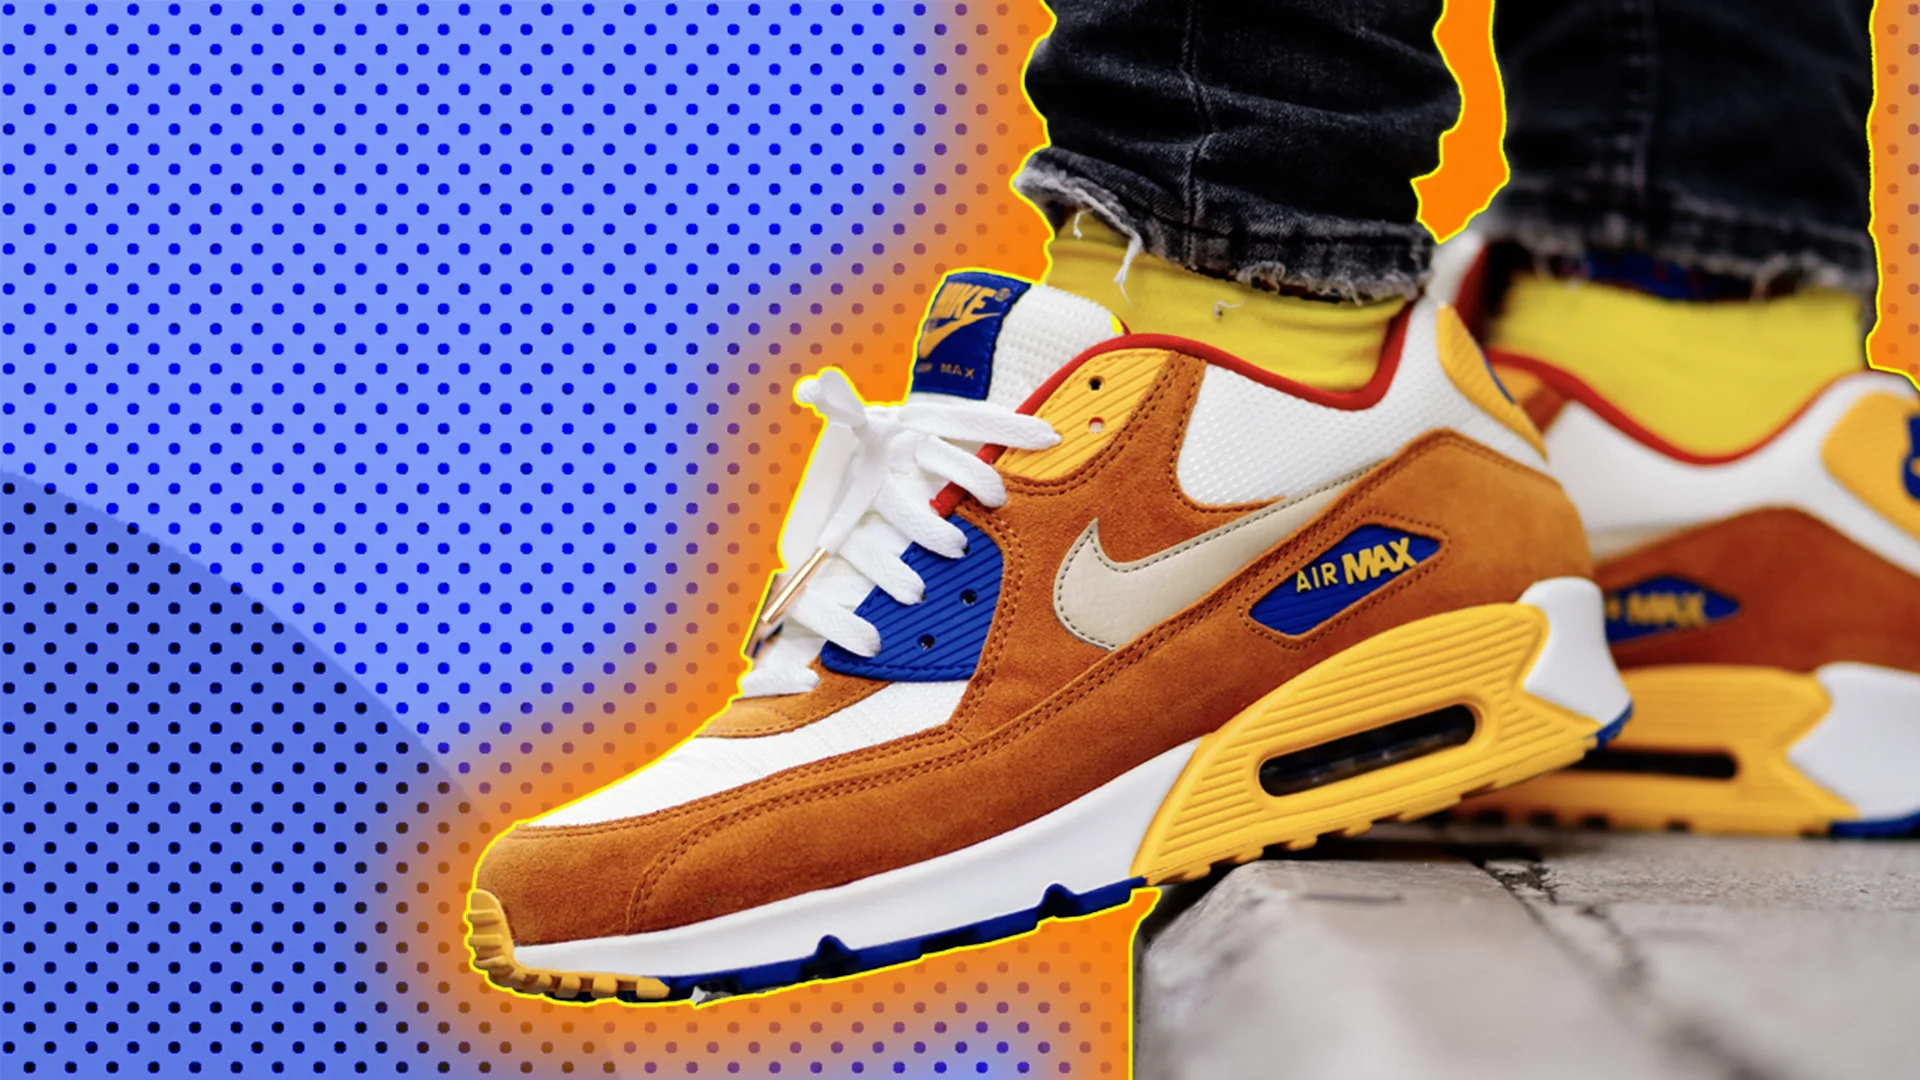 Orange, blue and white Air Max Trainers on a blue background with an orange glow